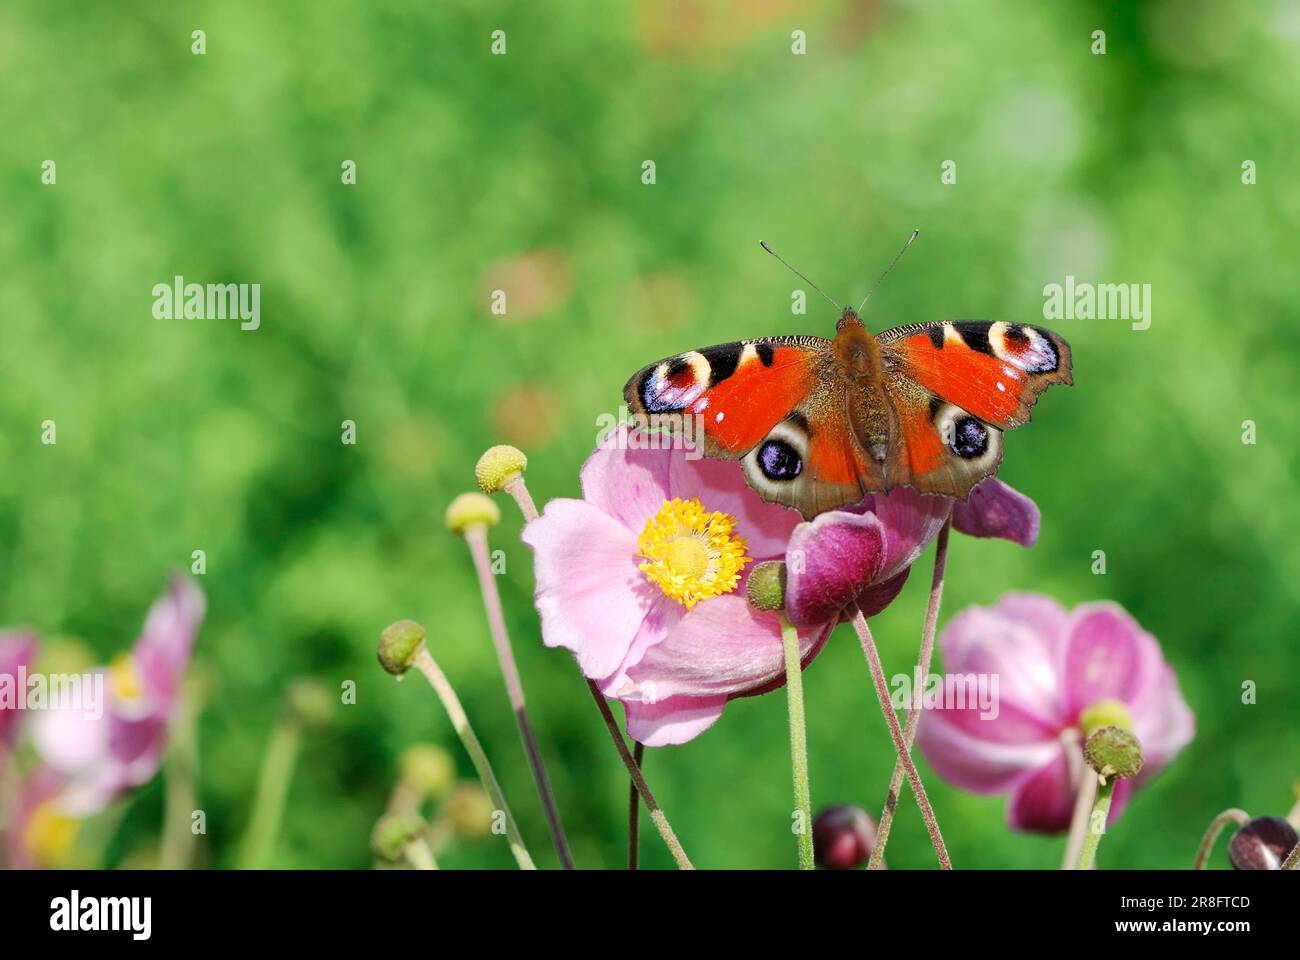 Peacock butterfly sitting on flowers in the garden Stock Photo